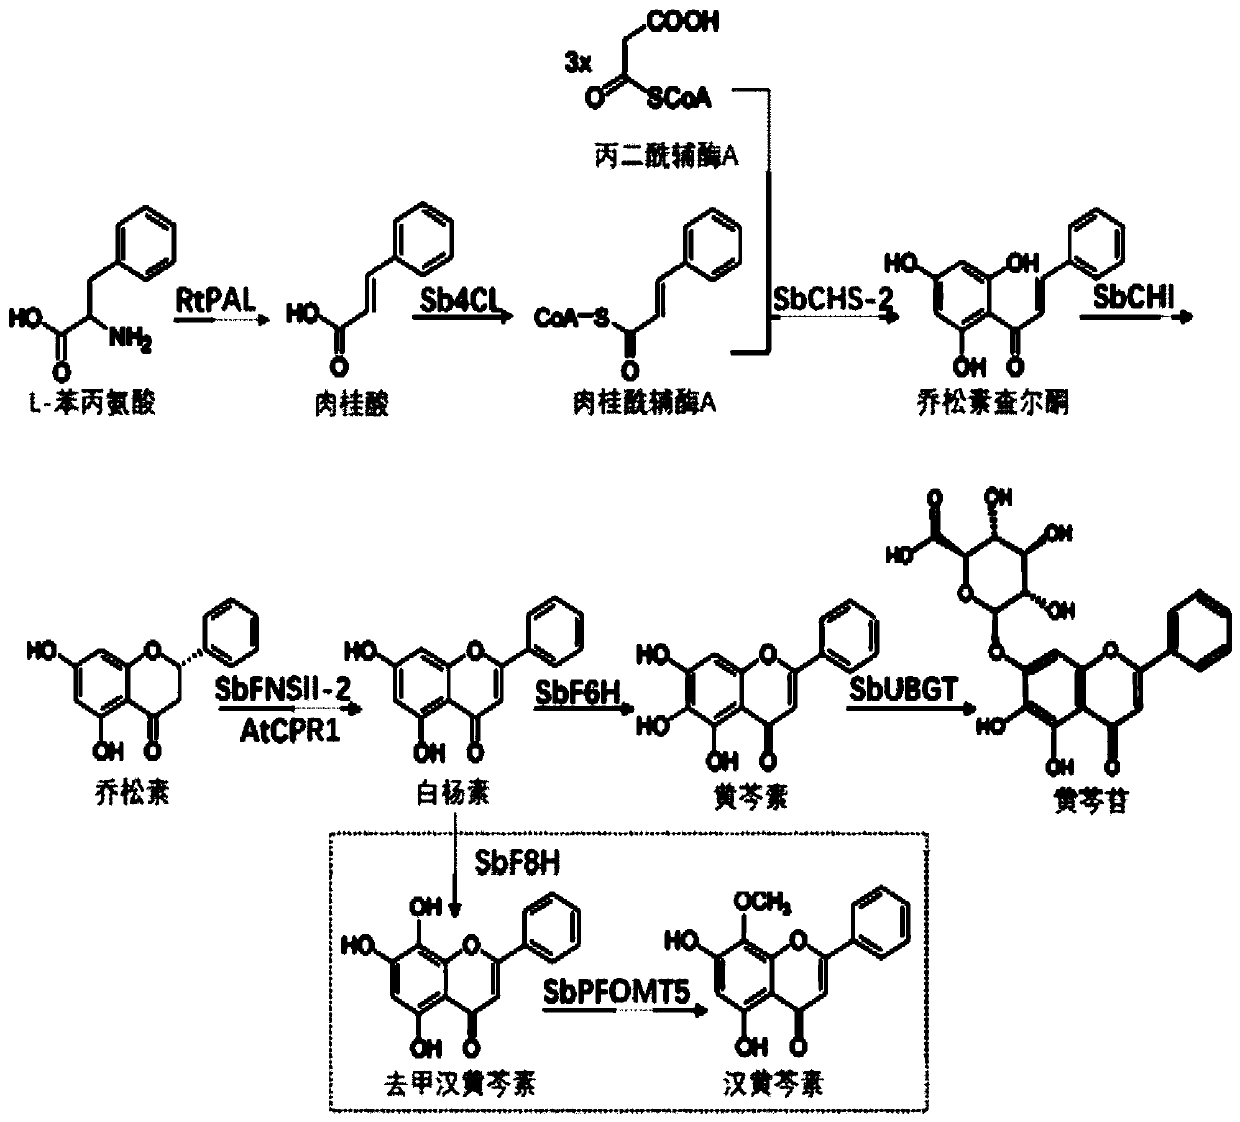 Genetically engineered saccharomycetes for producing baicalein compounds as well as construction method and application of genetically engineered saccharomycetes